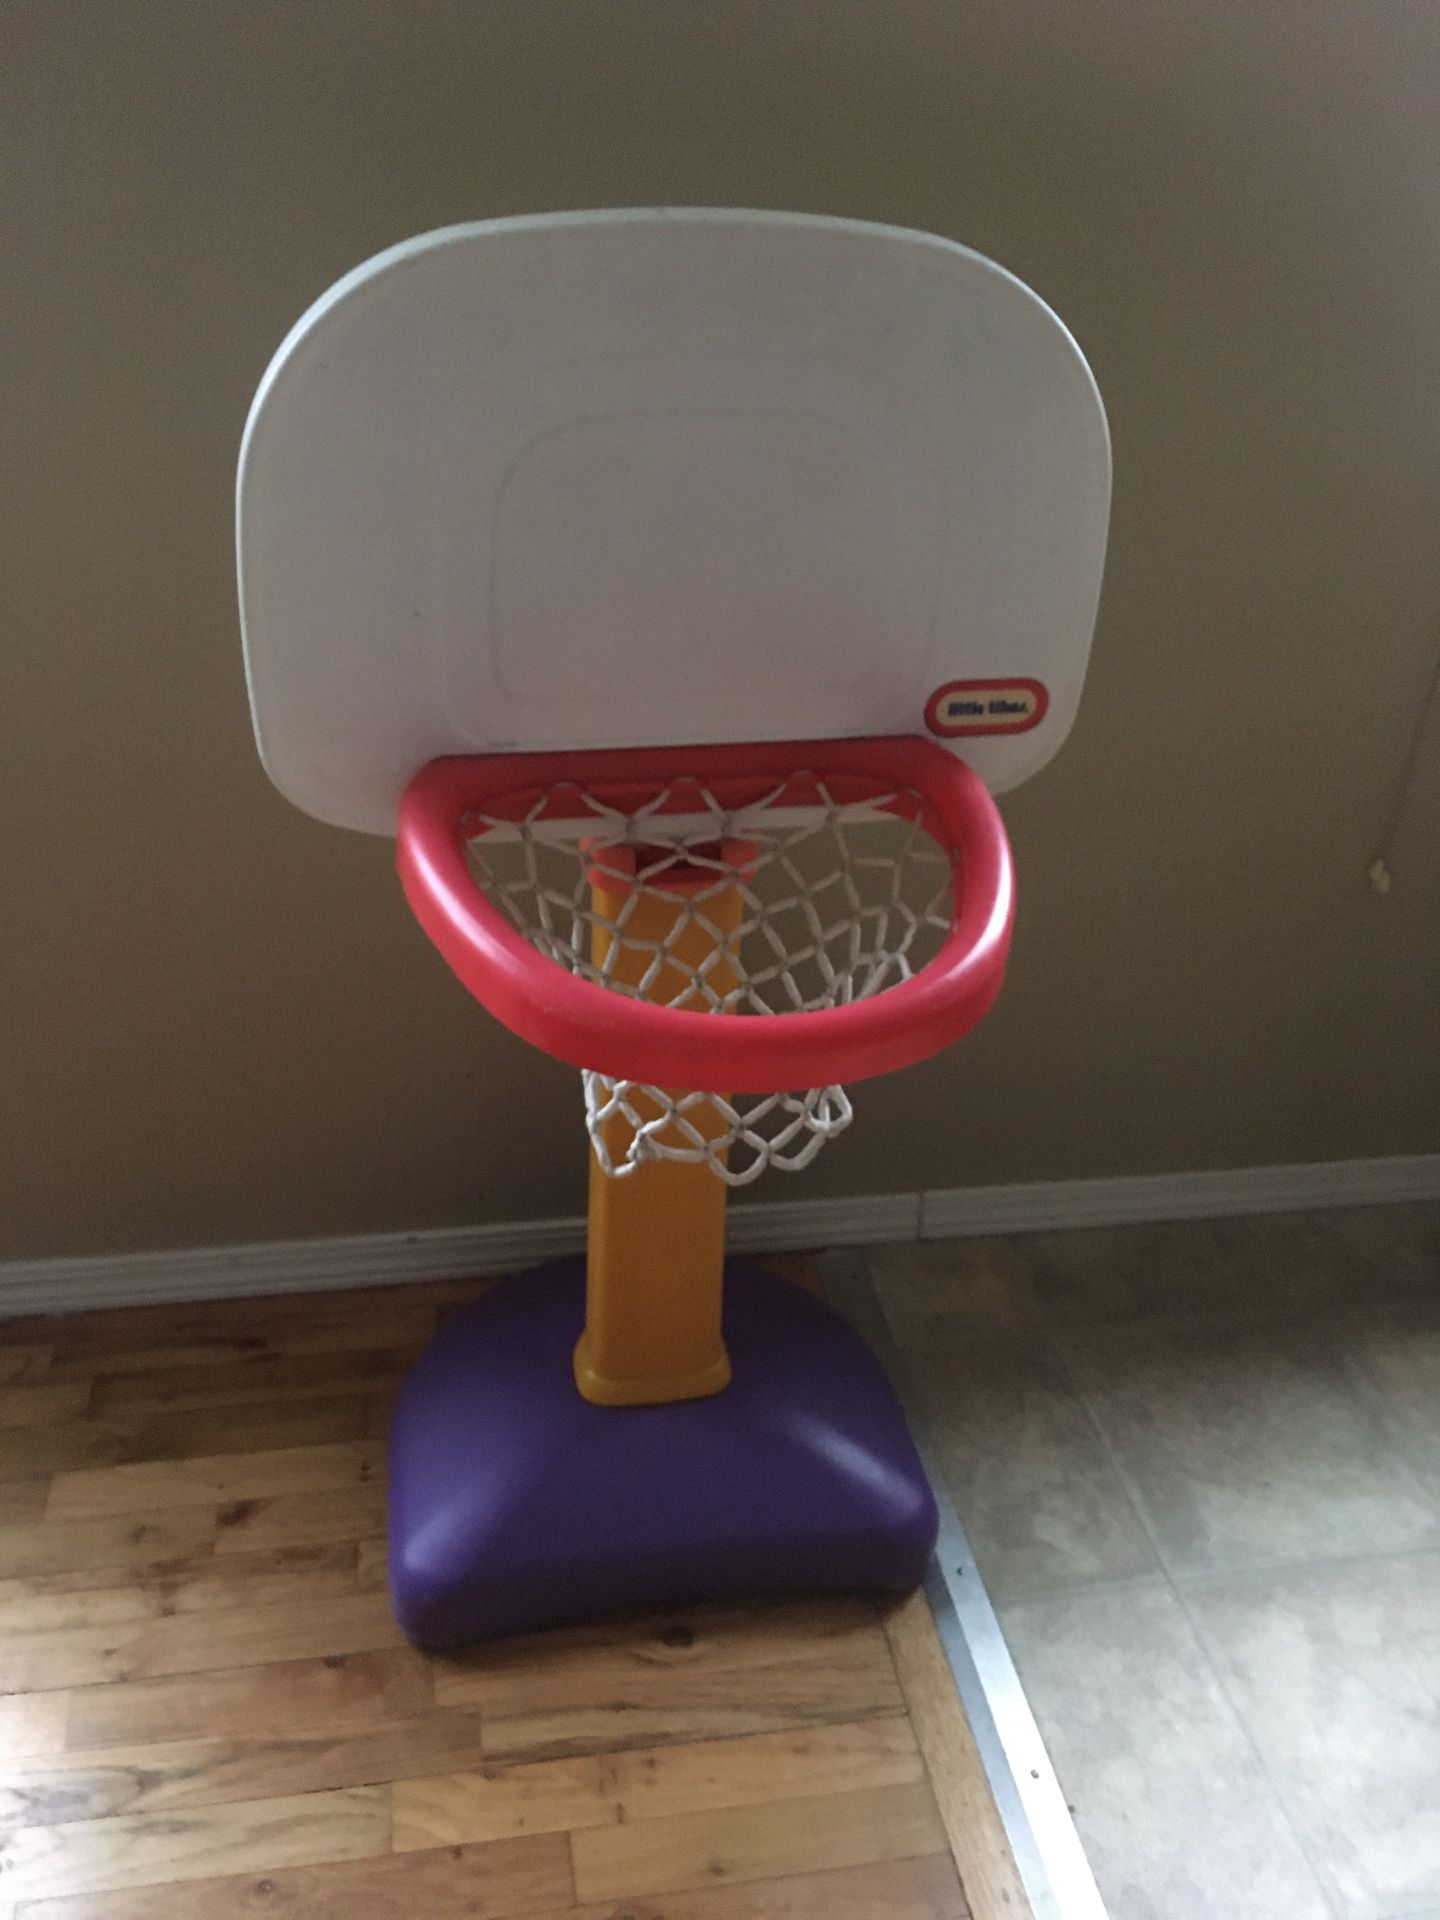 Basketball hoop with an adjustable stand